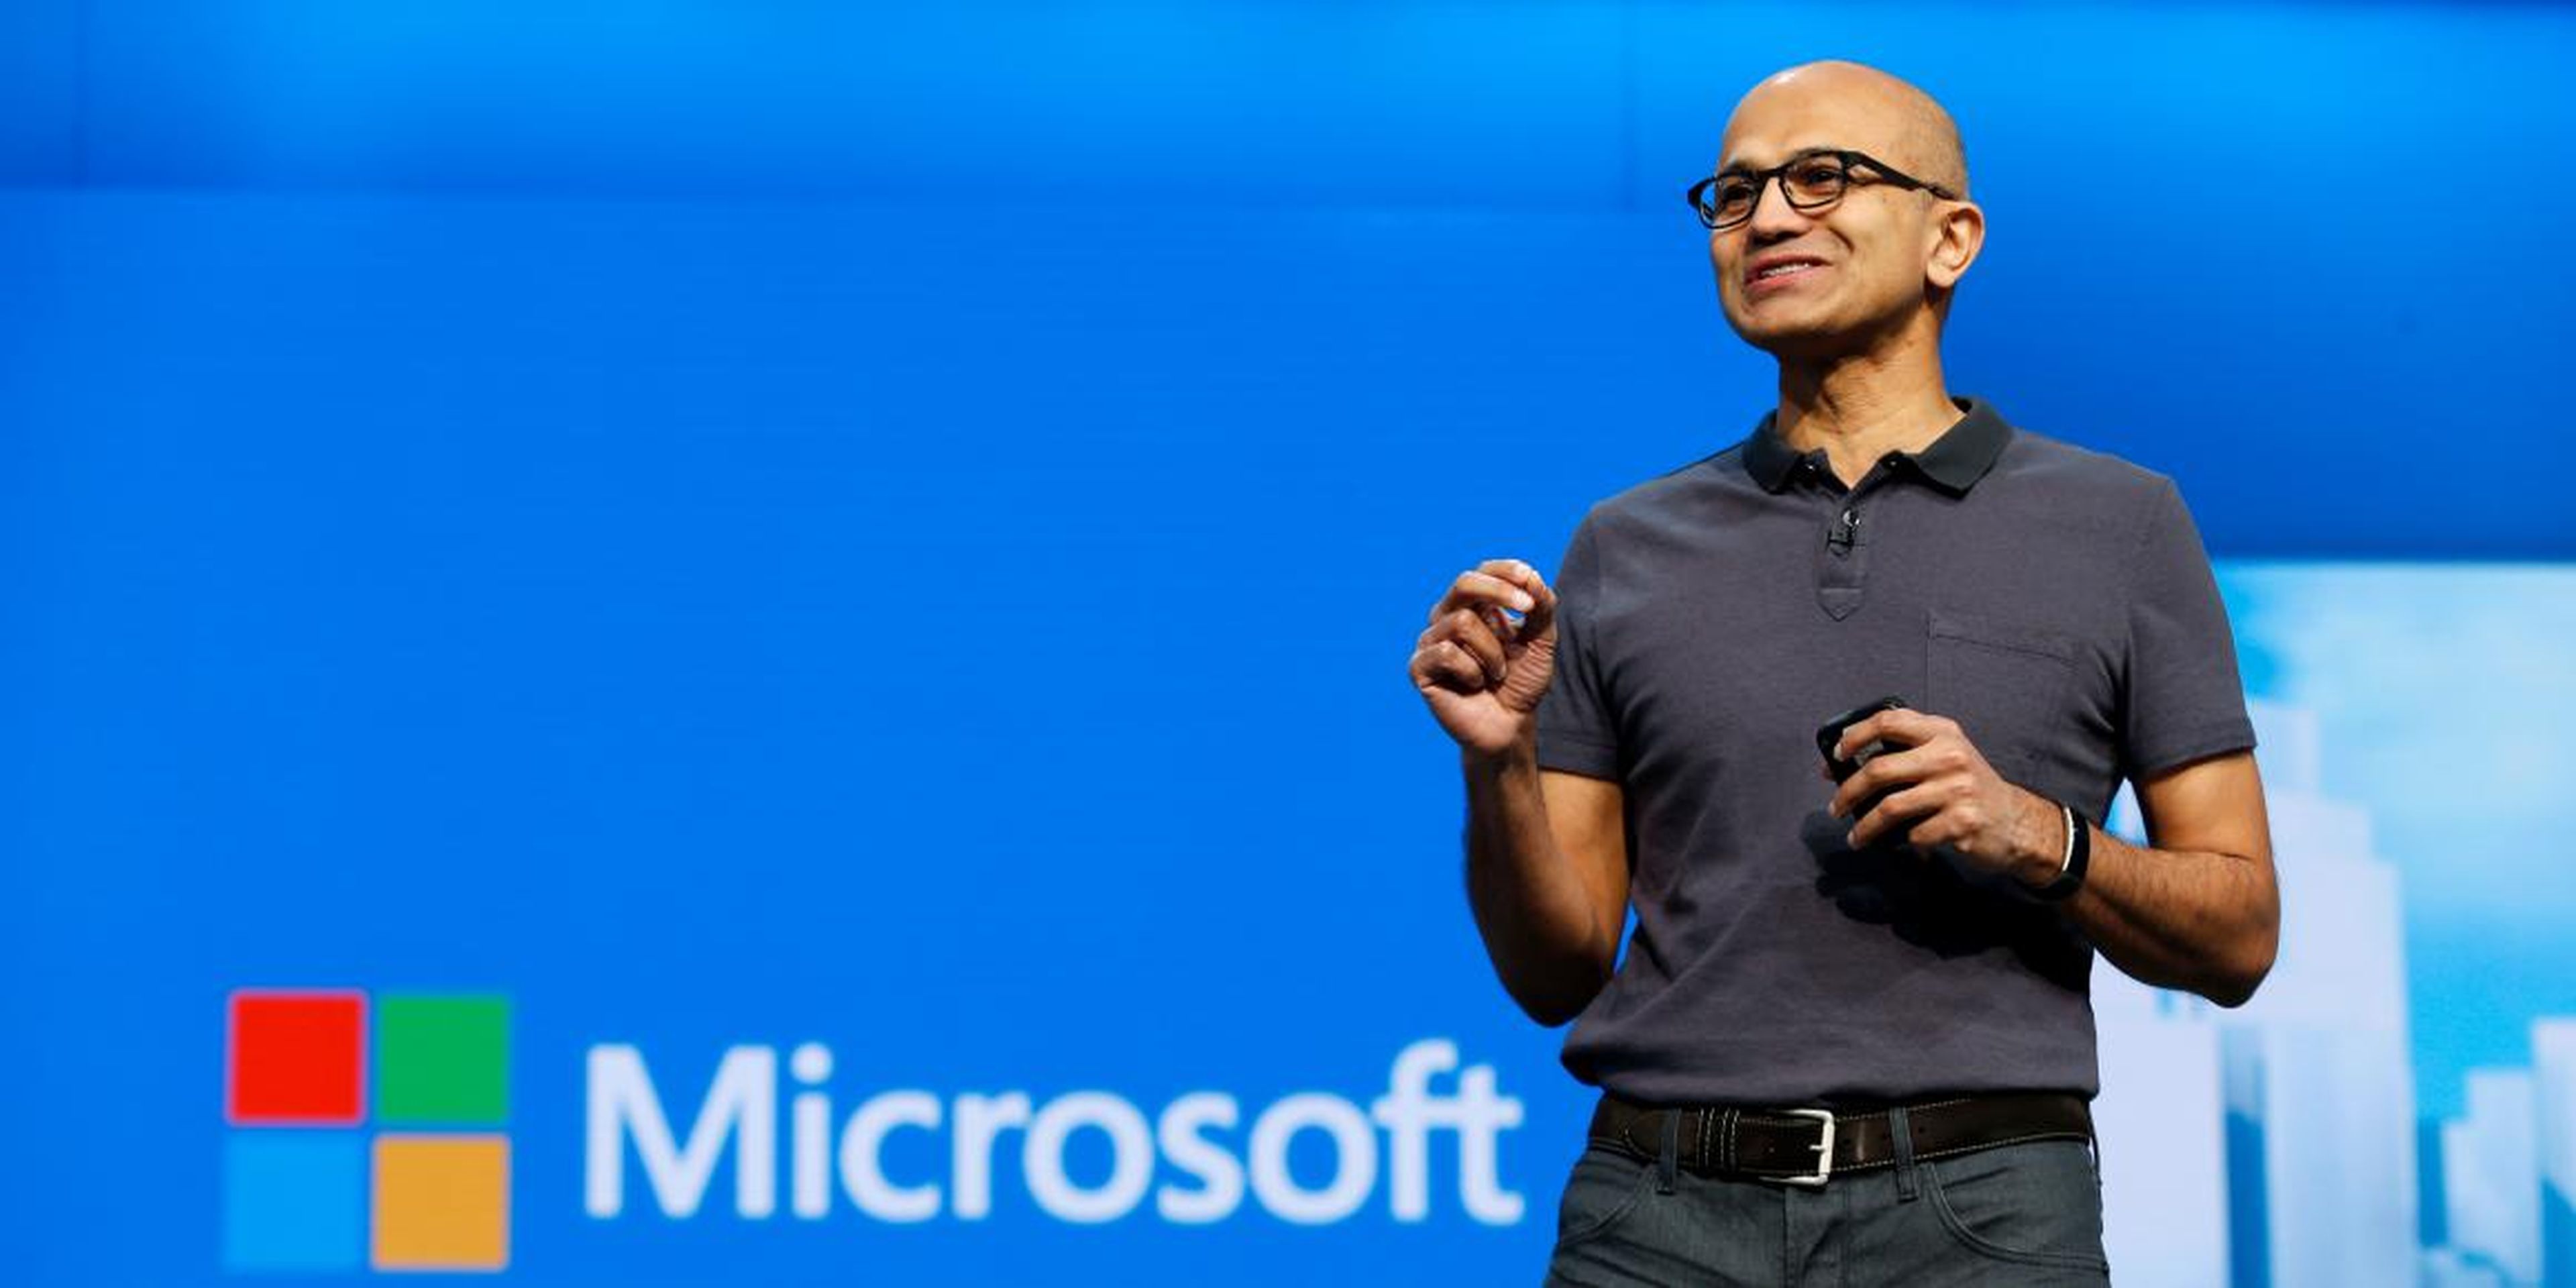 Microsoft hits record high after announcing $40 billion stock buyback plan, dividend boost